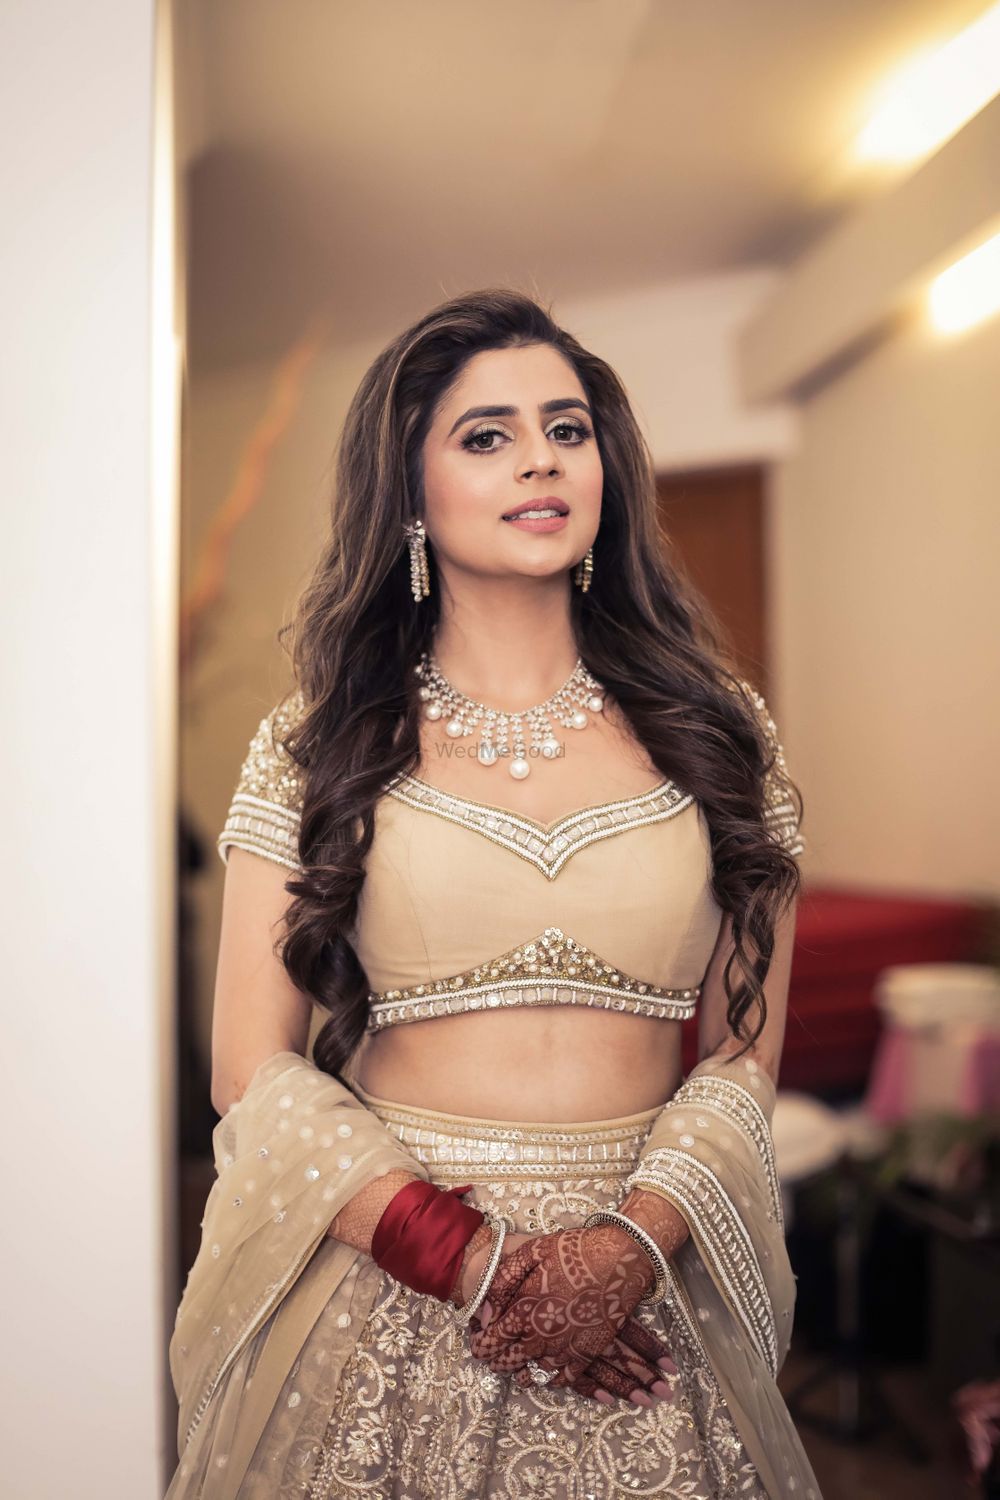 Photo of bride on engagement with beige lehenga and long hair